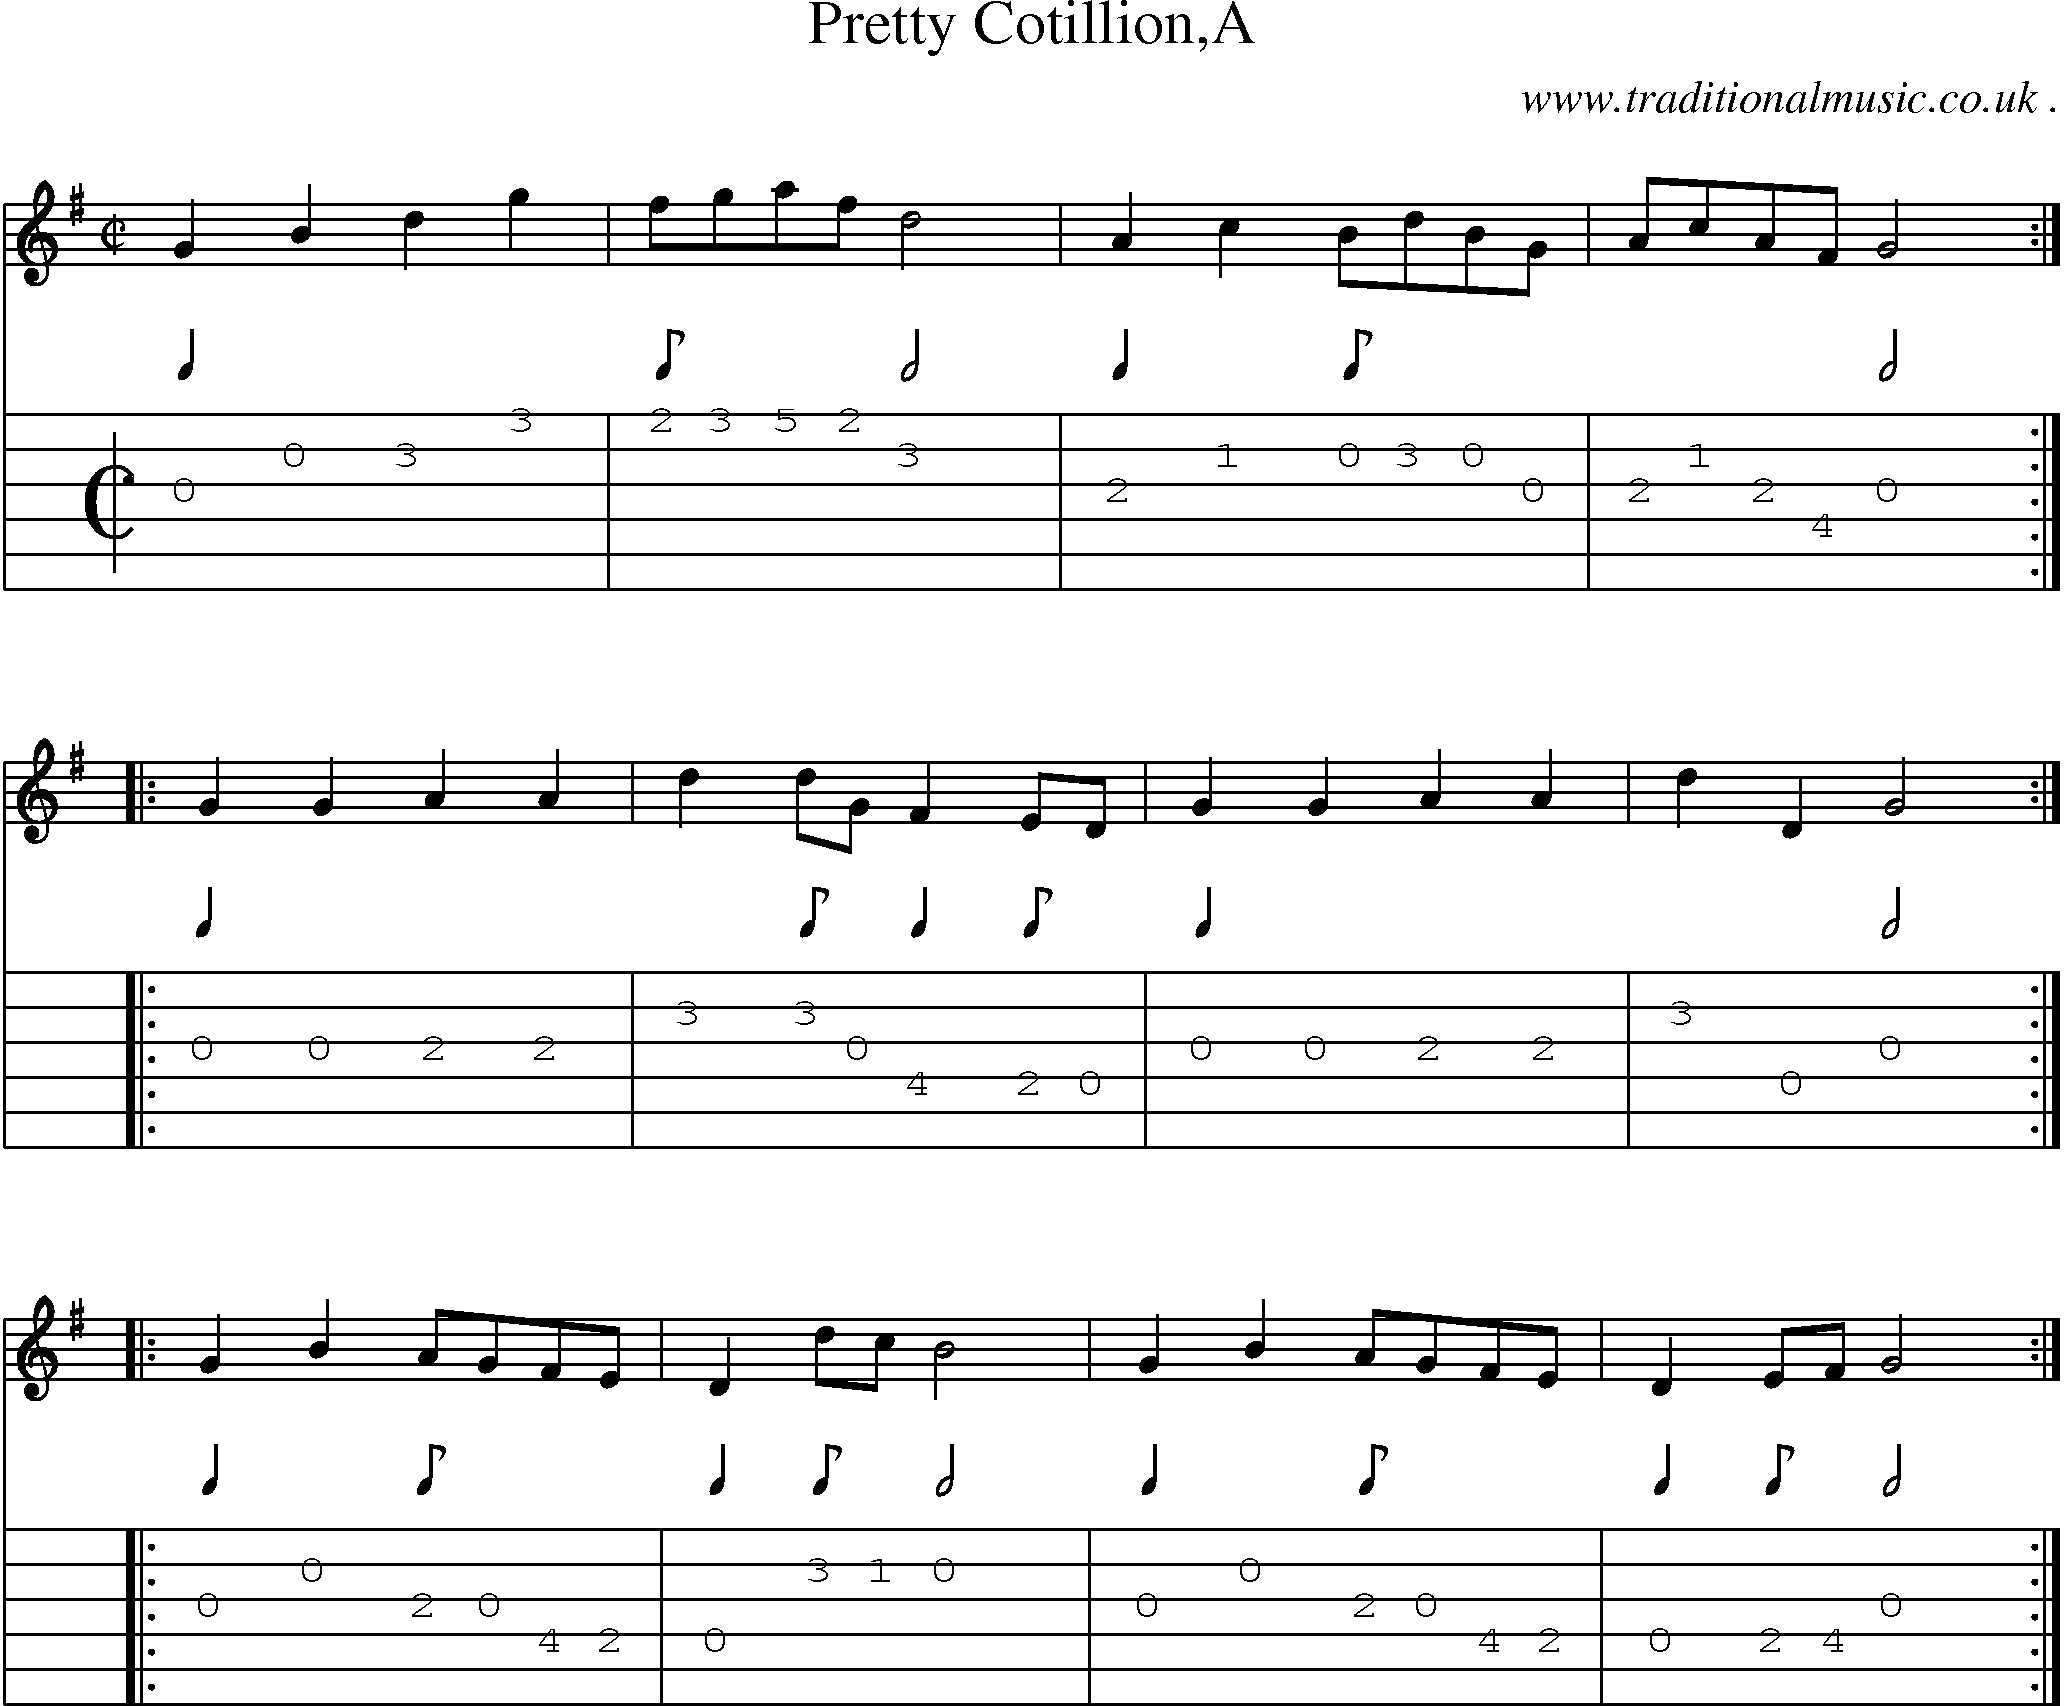 Sheet-Music and Guitar Tabs for Pretty Cotilliona